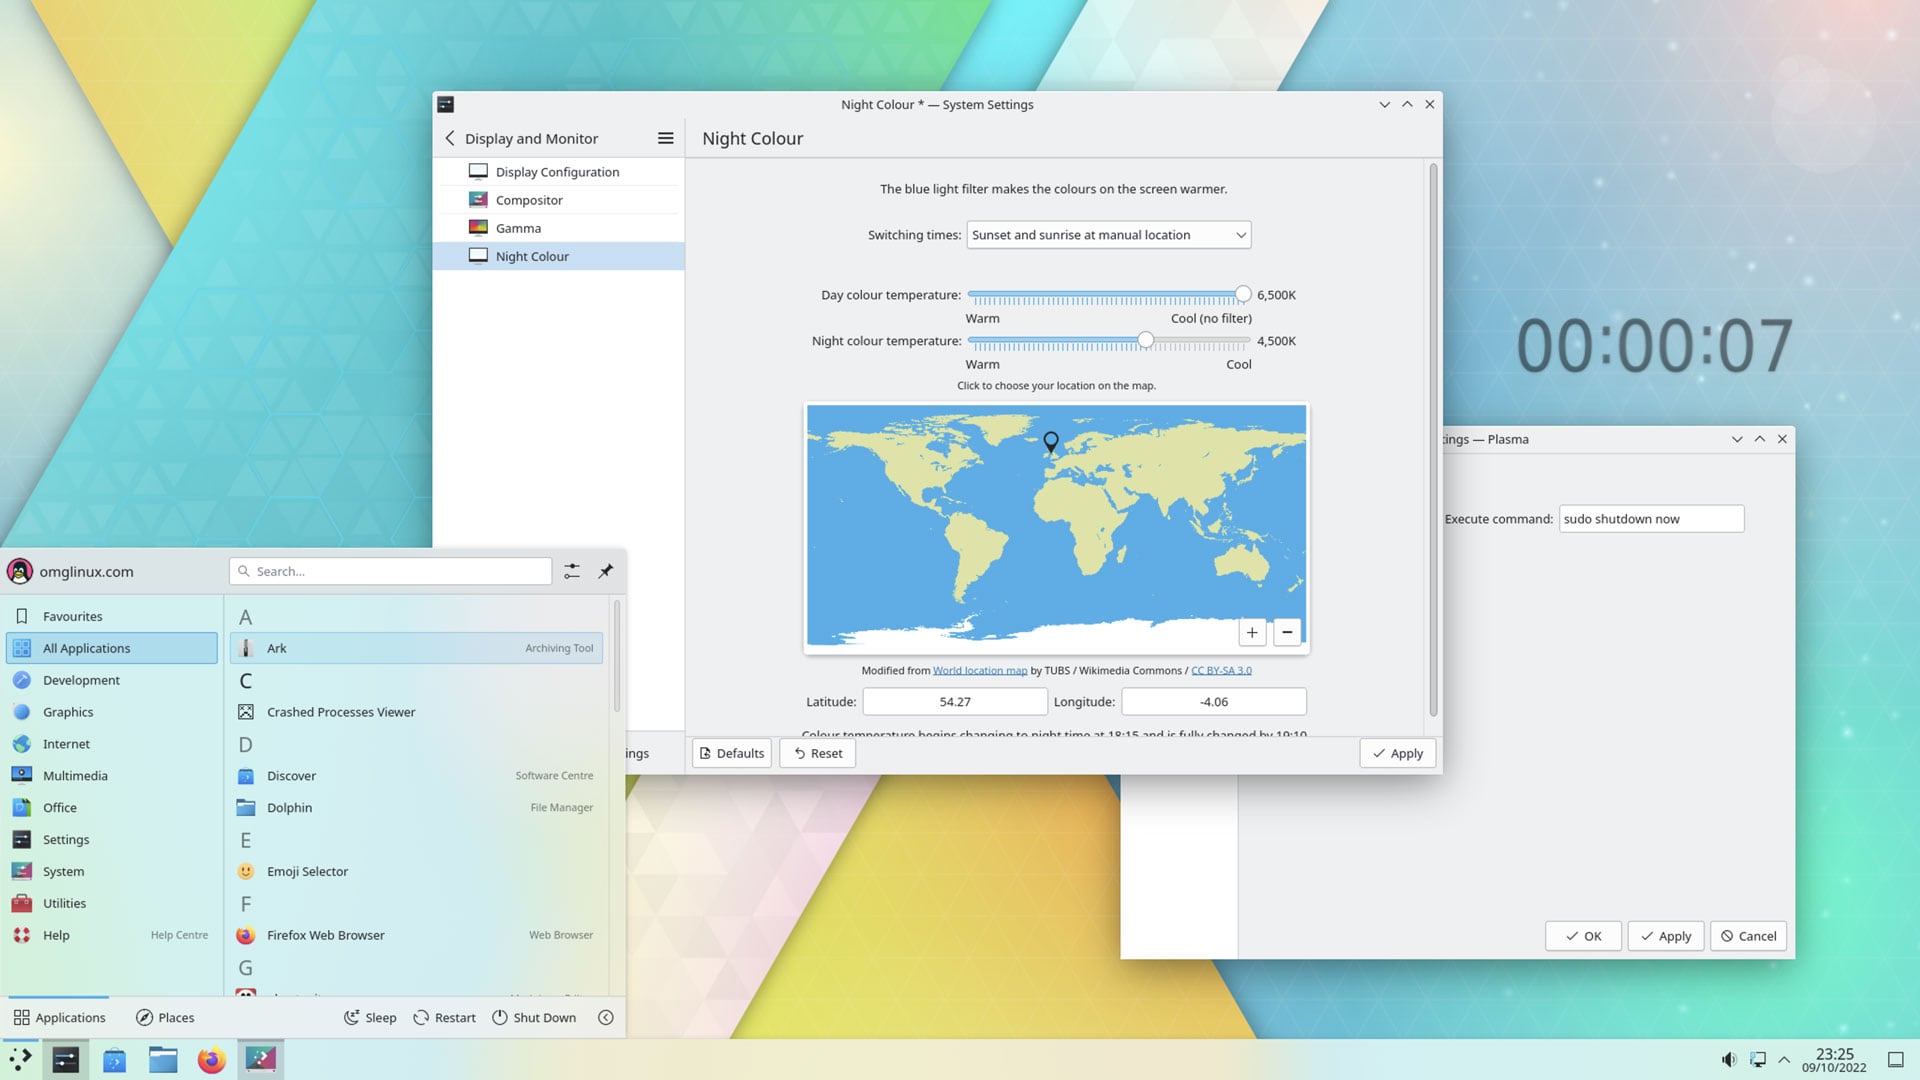 screenshot of kde plasma 5.26 on KDE Neon with app menu compact mode, night color manual settings, and timer plasmoid visible